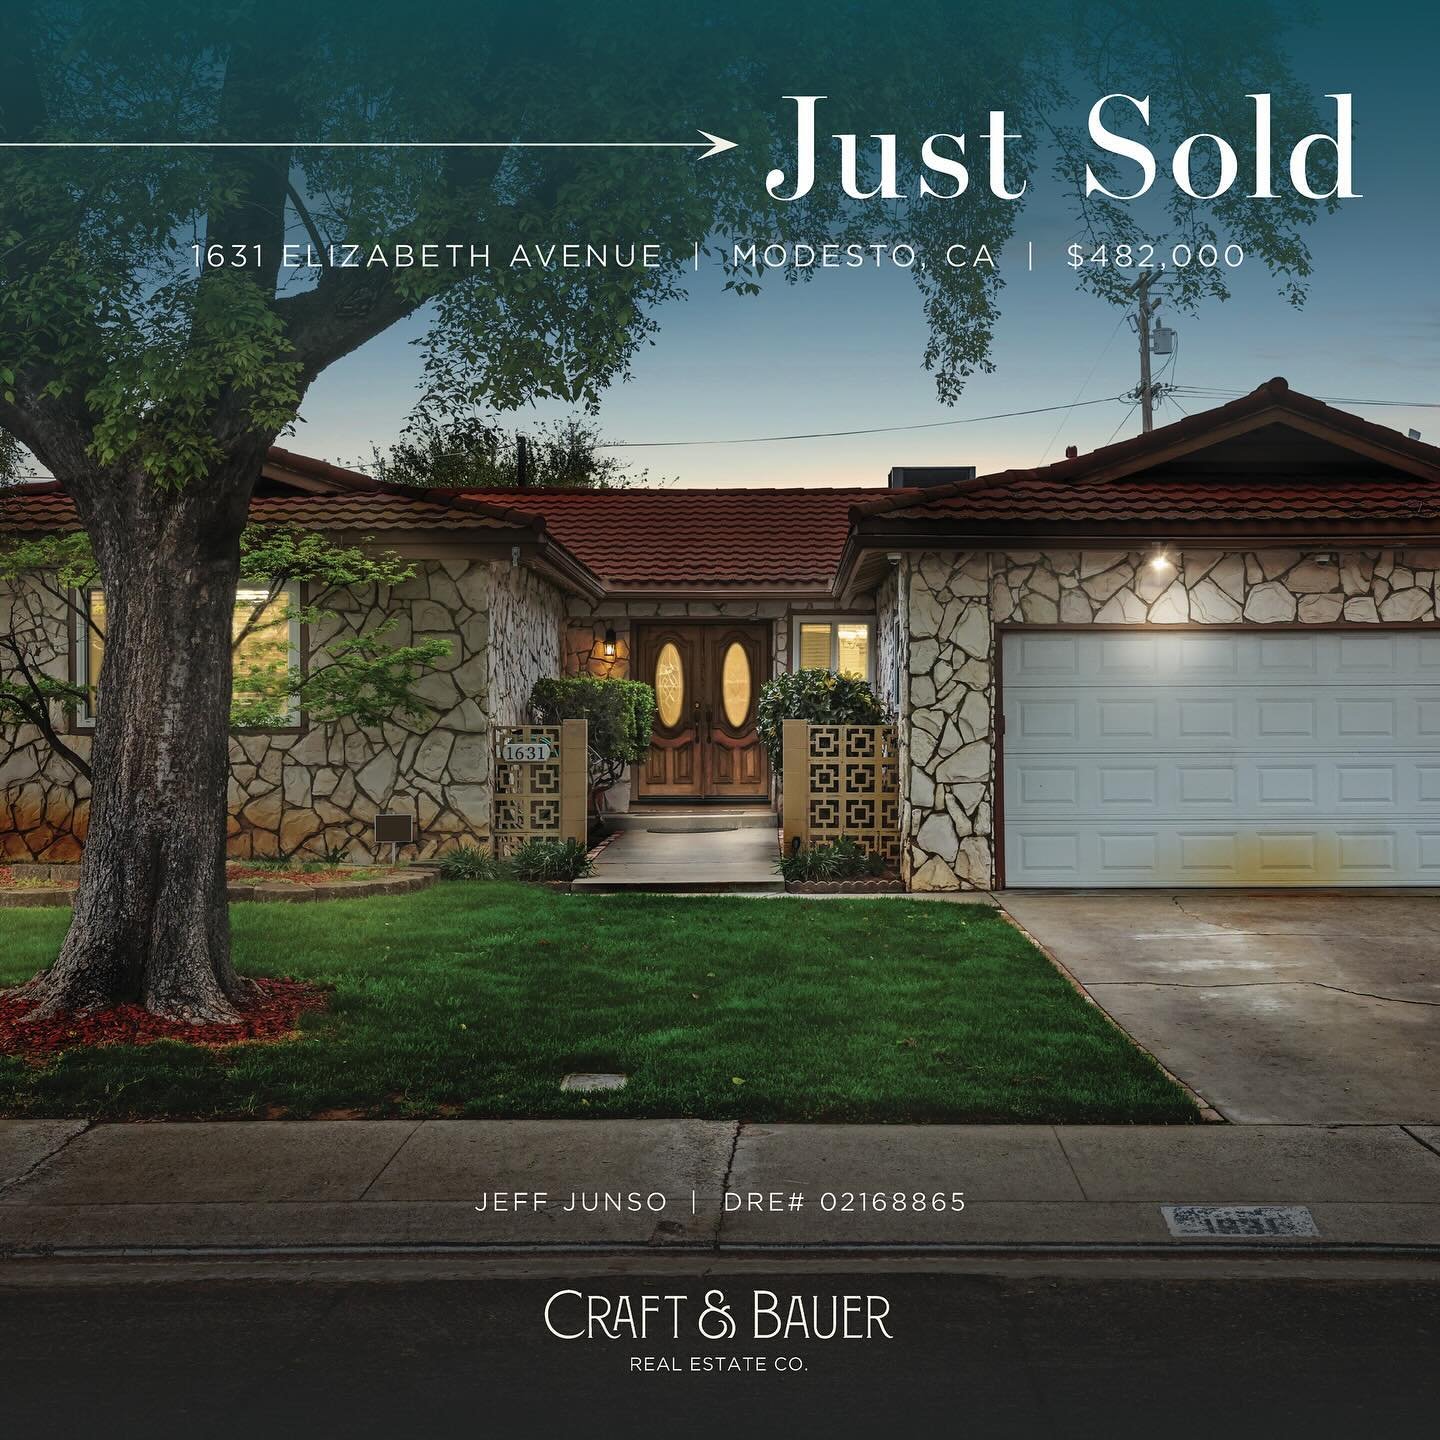 JUST SOLD 🎉 Congratulations to the new owners of this lovely 4-bedroom home!⁠
⁠
🏡 1631 Elizabeth Avenue ⁠
📍 Modesto, CA⁠
💰 $482,000⁠
⁠
Complete with a beautiful pool and spa located within a lovely landscaped backyard. Located in a very desirable